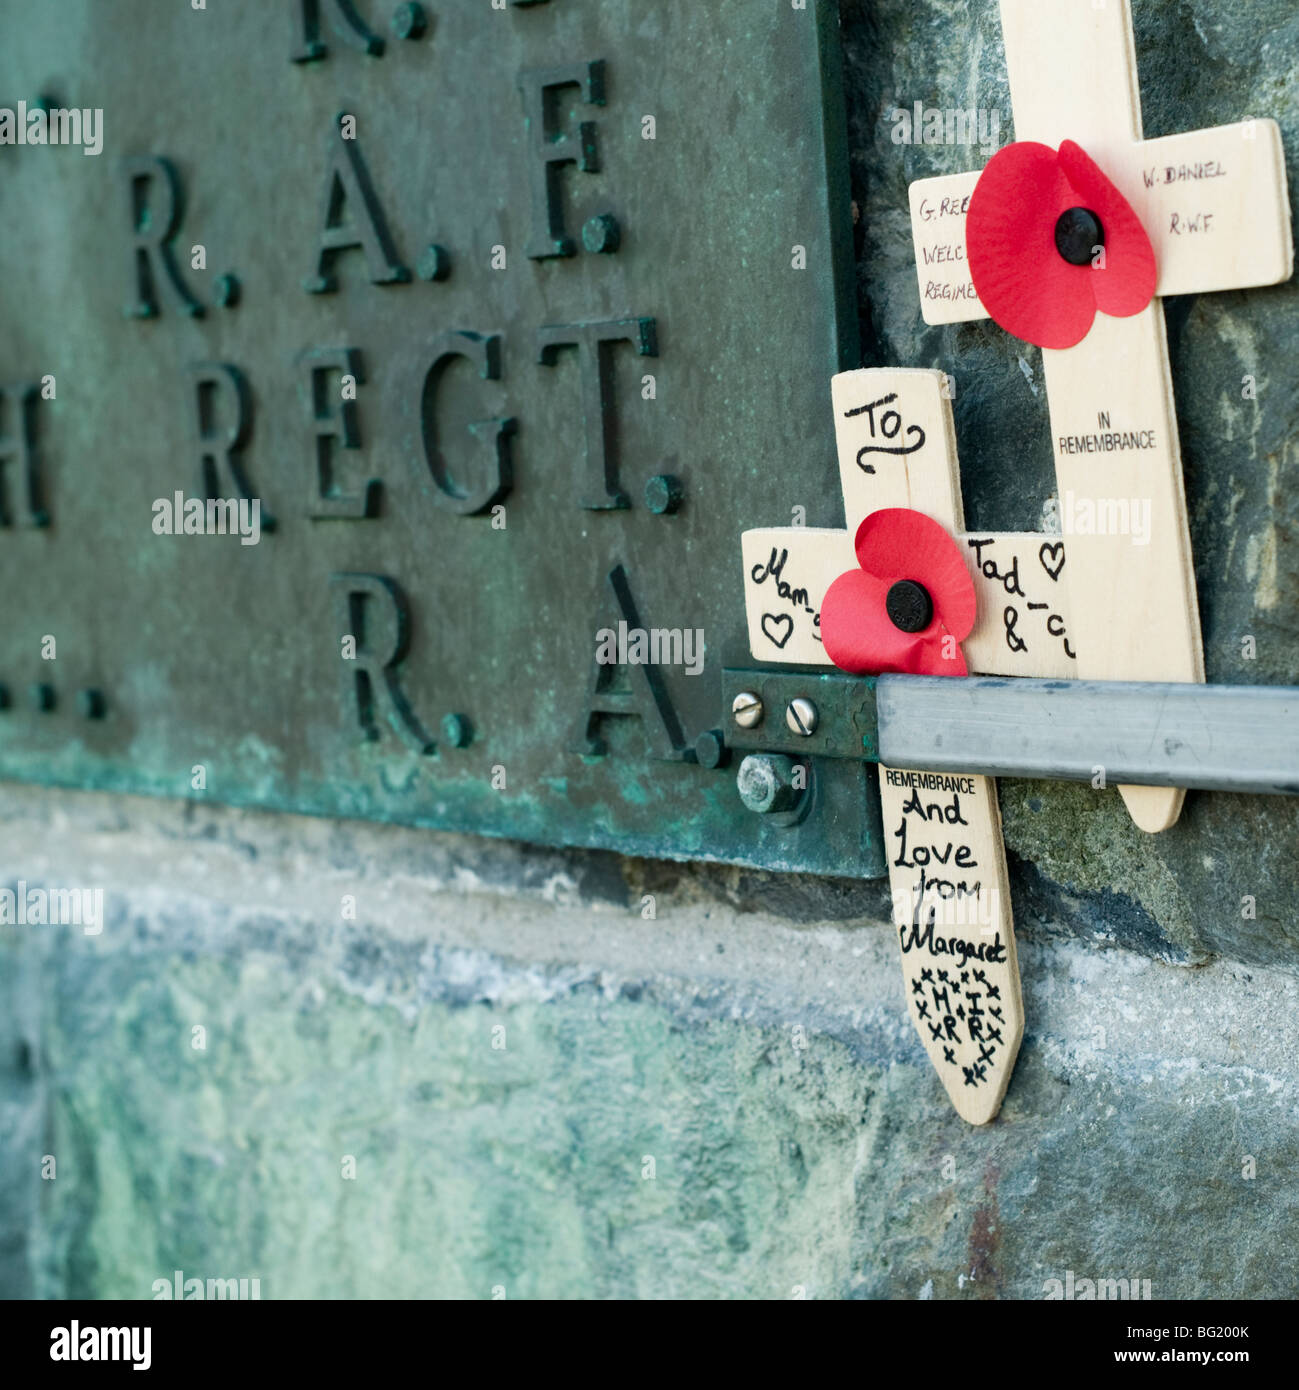 Hand written small wooden crosses on war memorial in remembrance of soldiers killed in wars, UK Stock Photo